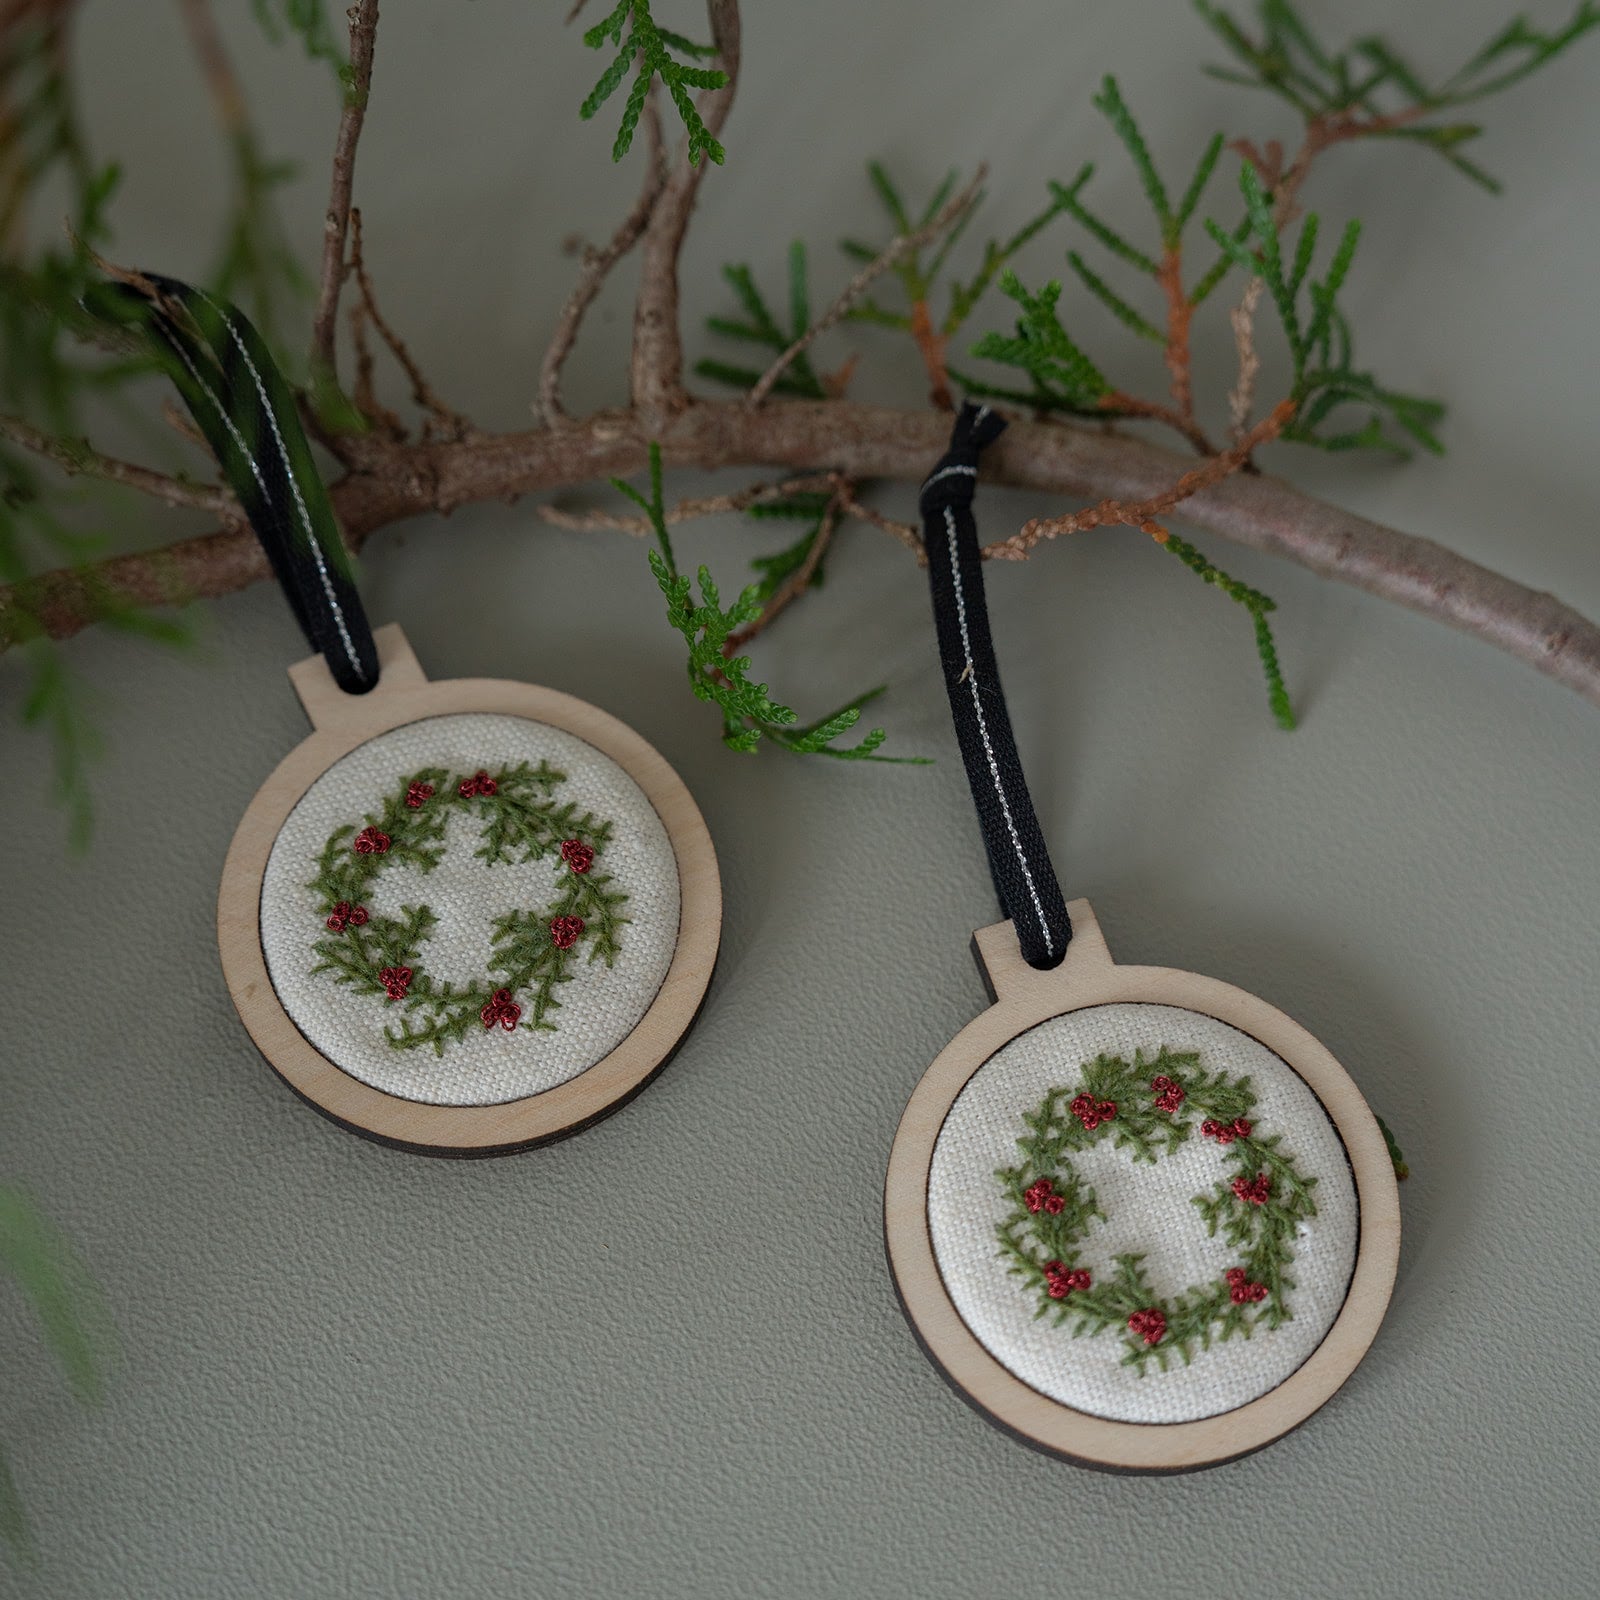 Hand embroidered holiday ornament